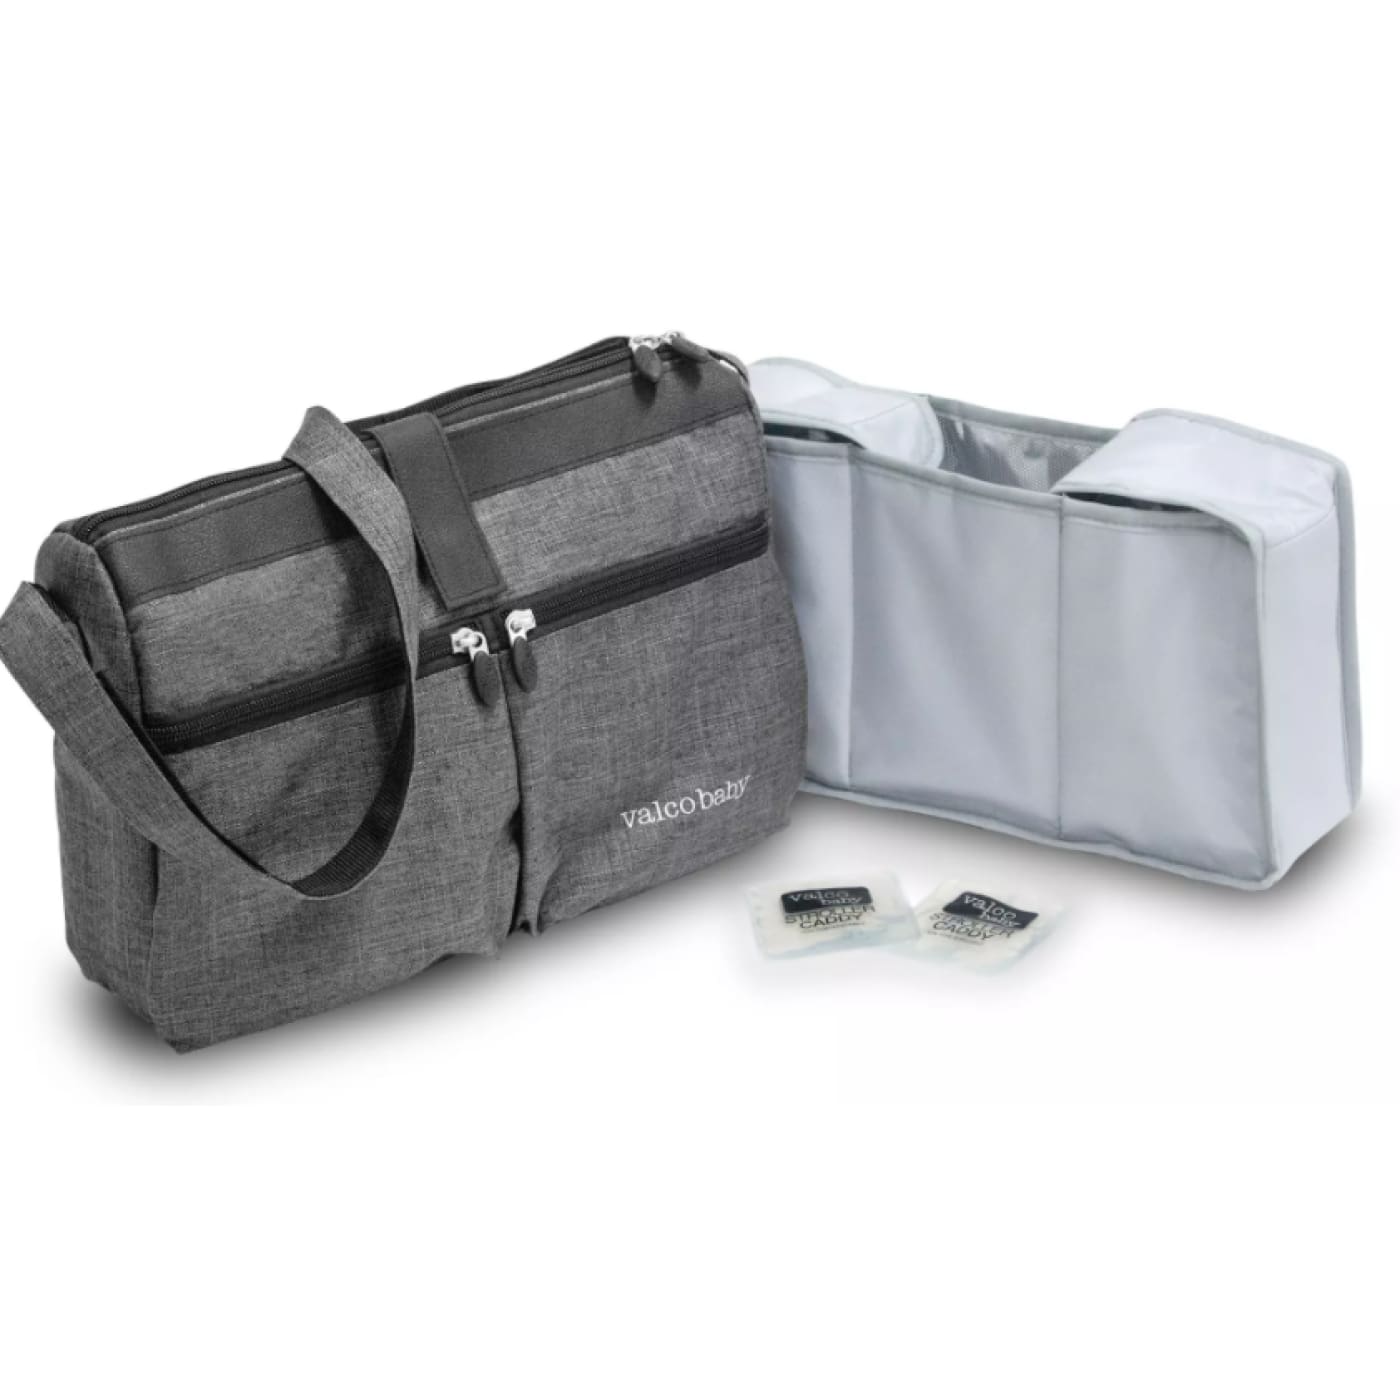 Valco Baby All Purpose Caddy - Charcoal - Charcoal - PRAMS & STROLLERS - PRAM ORGANISERS